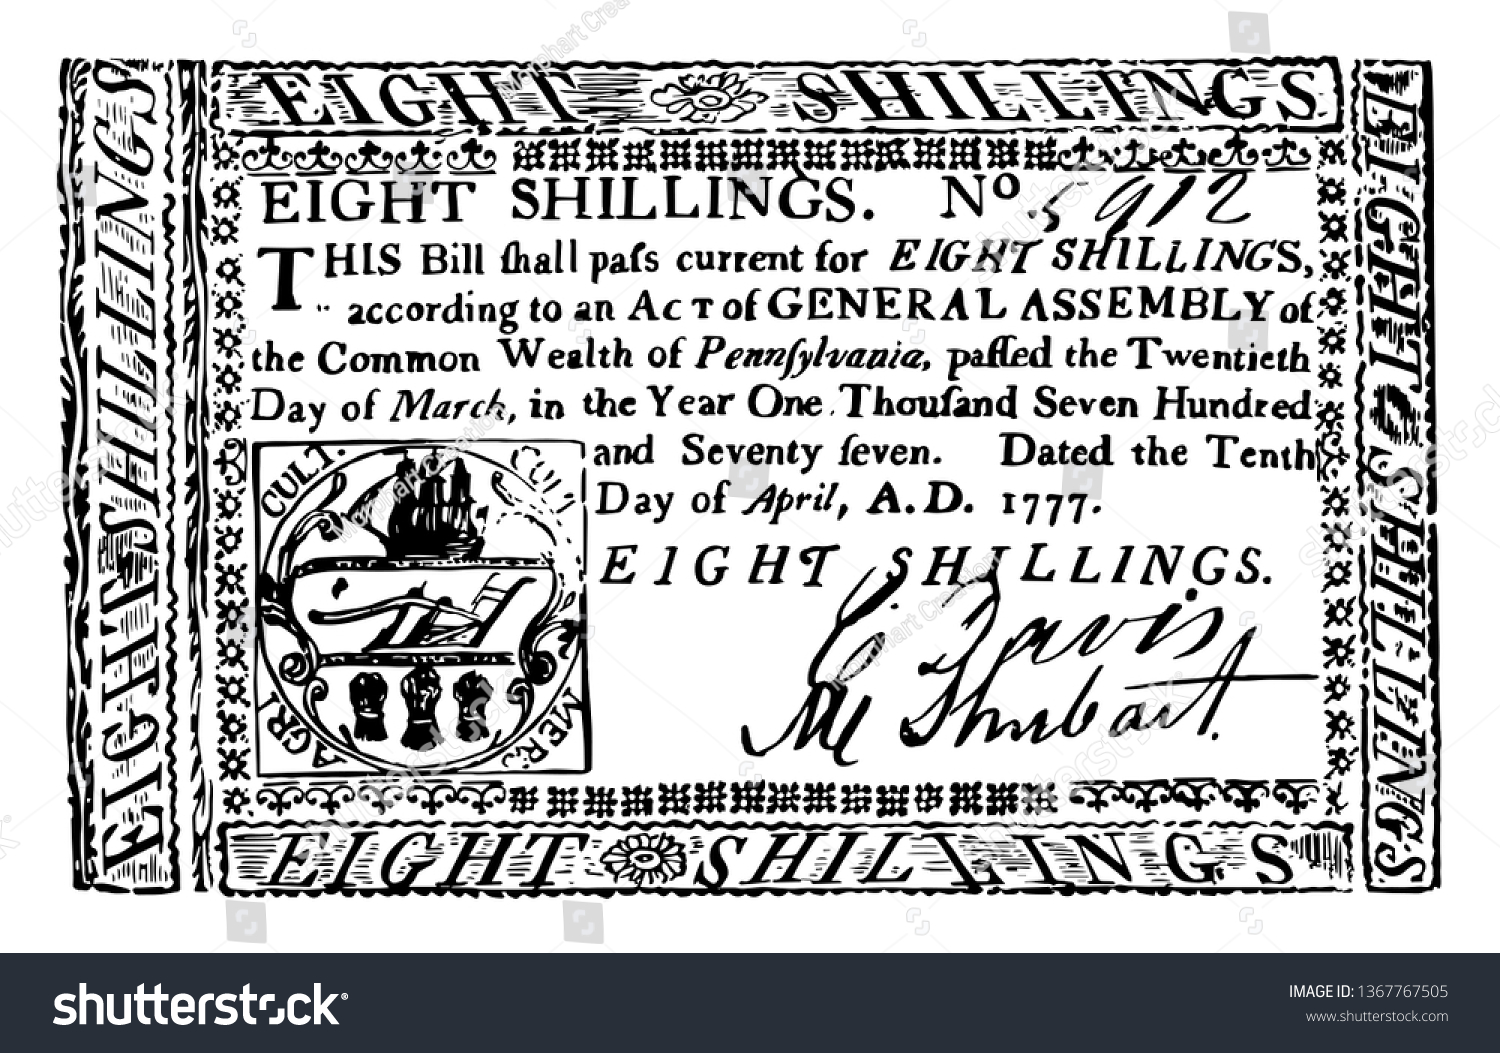 SVG of This is the Eight Shillings Bill New York currency from 1777. This is the portrait of the Frame, arms and value printed in red in the upper part of the bill, vintage line drawing or engraving svg